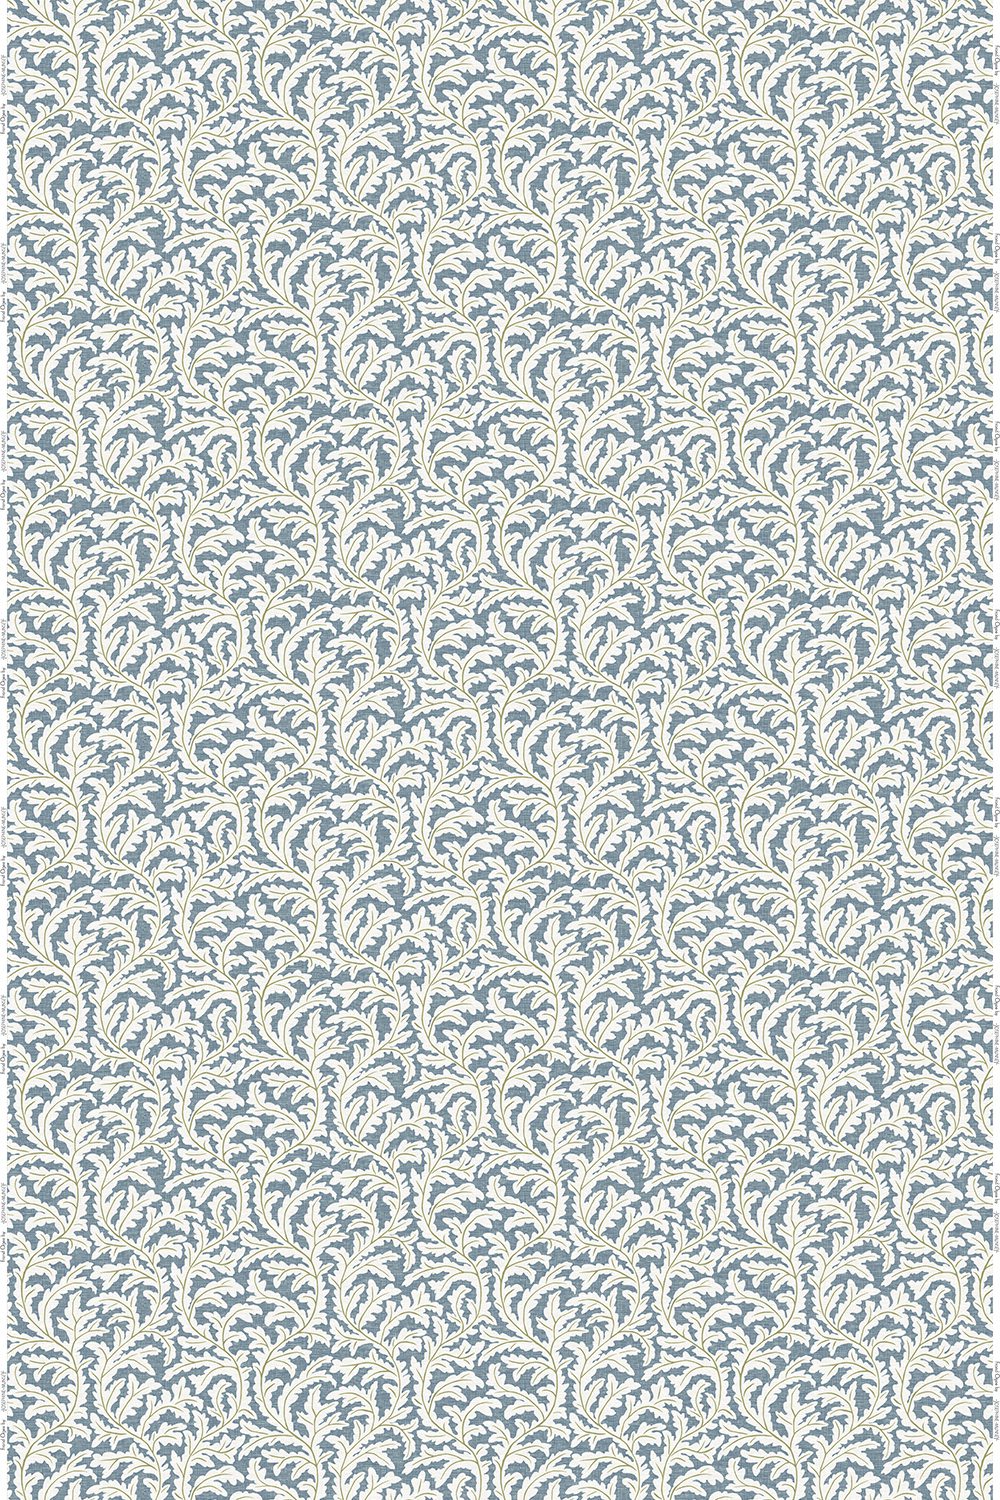 JMF-202501-PLN | Frond Ogee | Blue and Olive | Pure Linen | Full Repeat